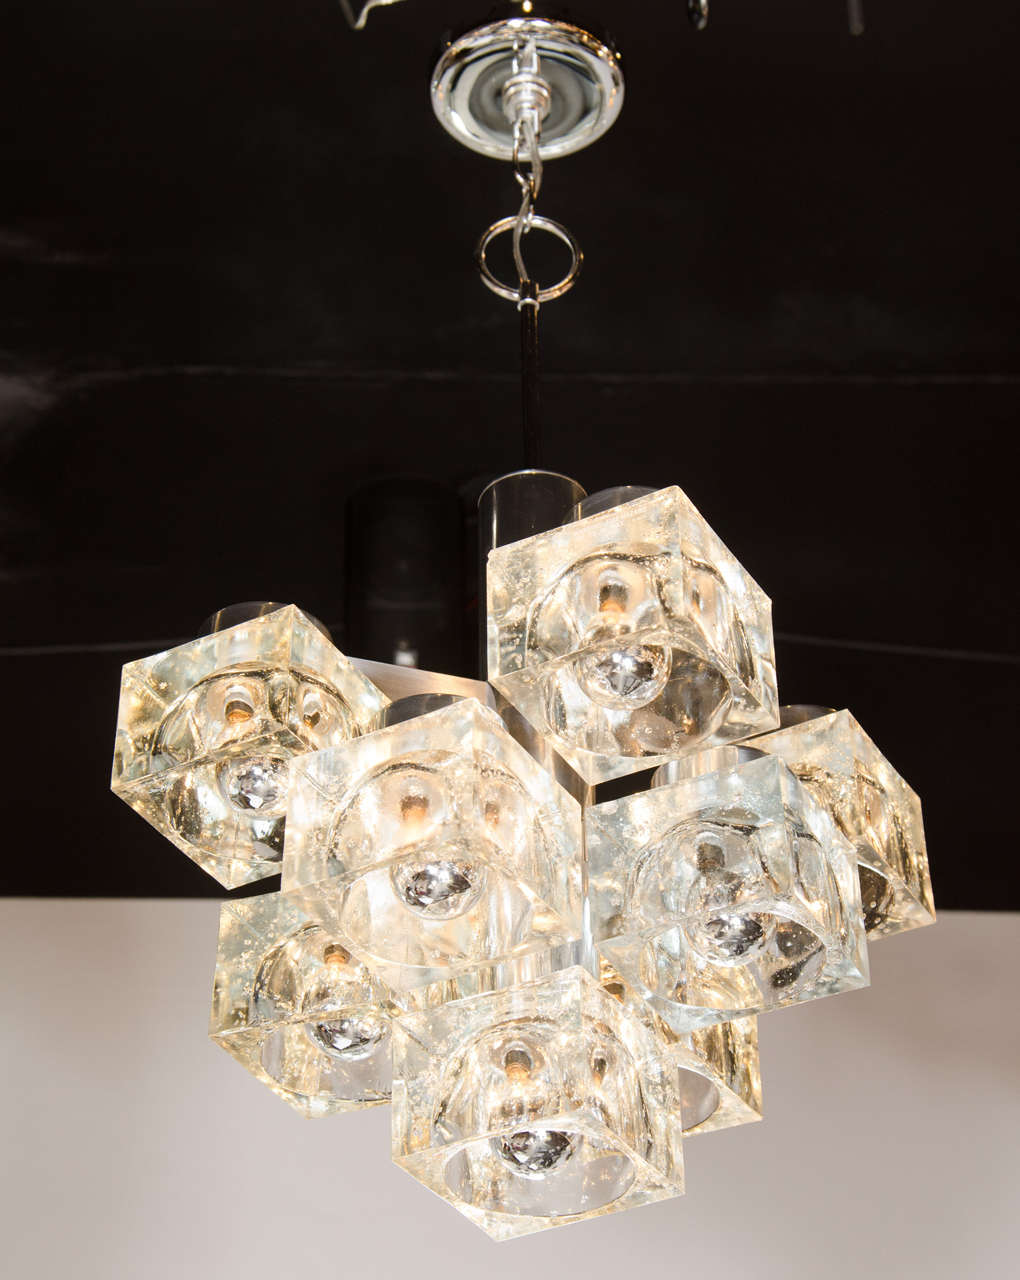 This astonishing Mid-Century Modern chandelier by Sciolari features square ice cube silhouette with chrome detailing. It has been newly rewired and the height can be adjusted to suit and even hung as a flush mount chandelier.